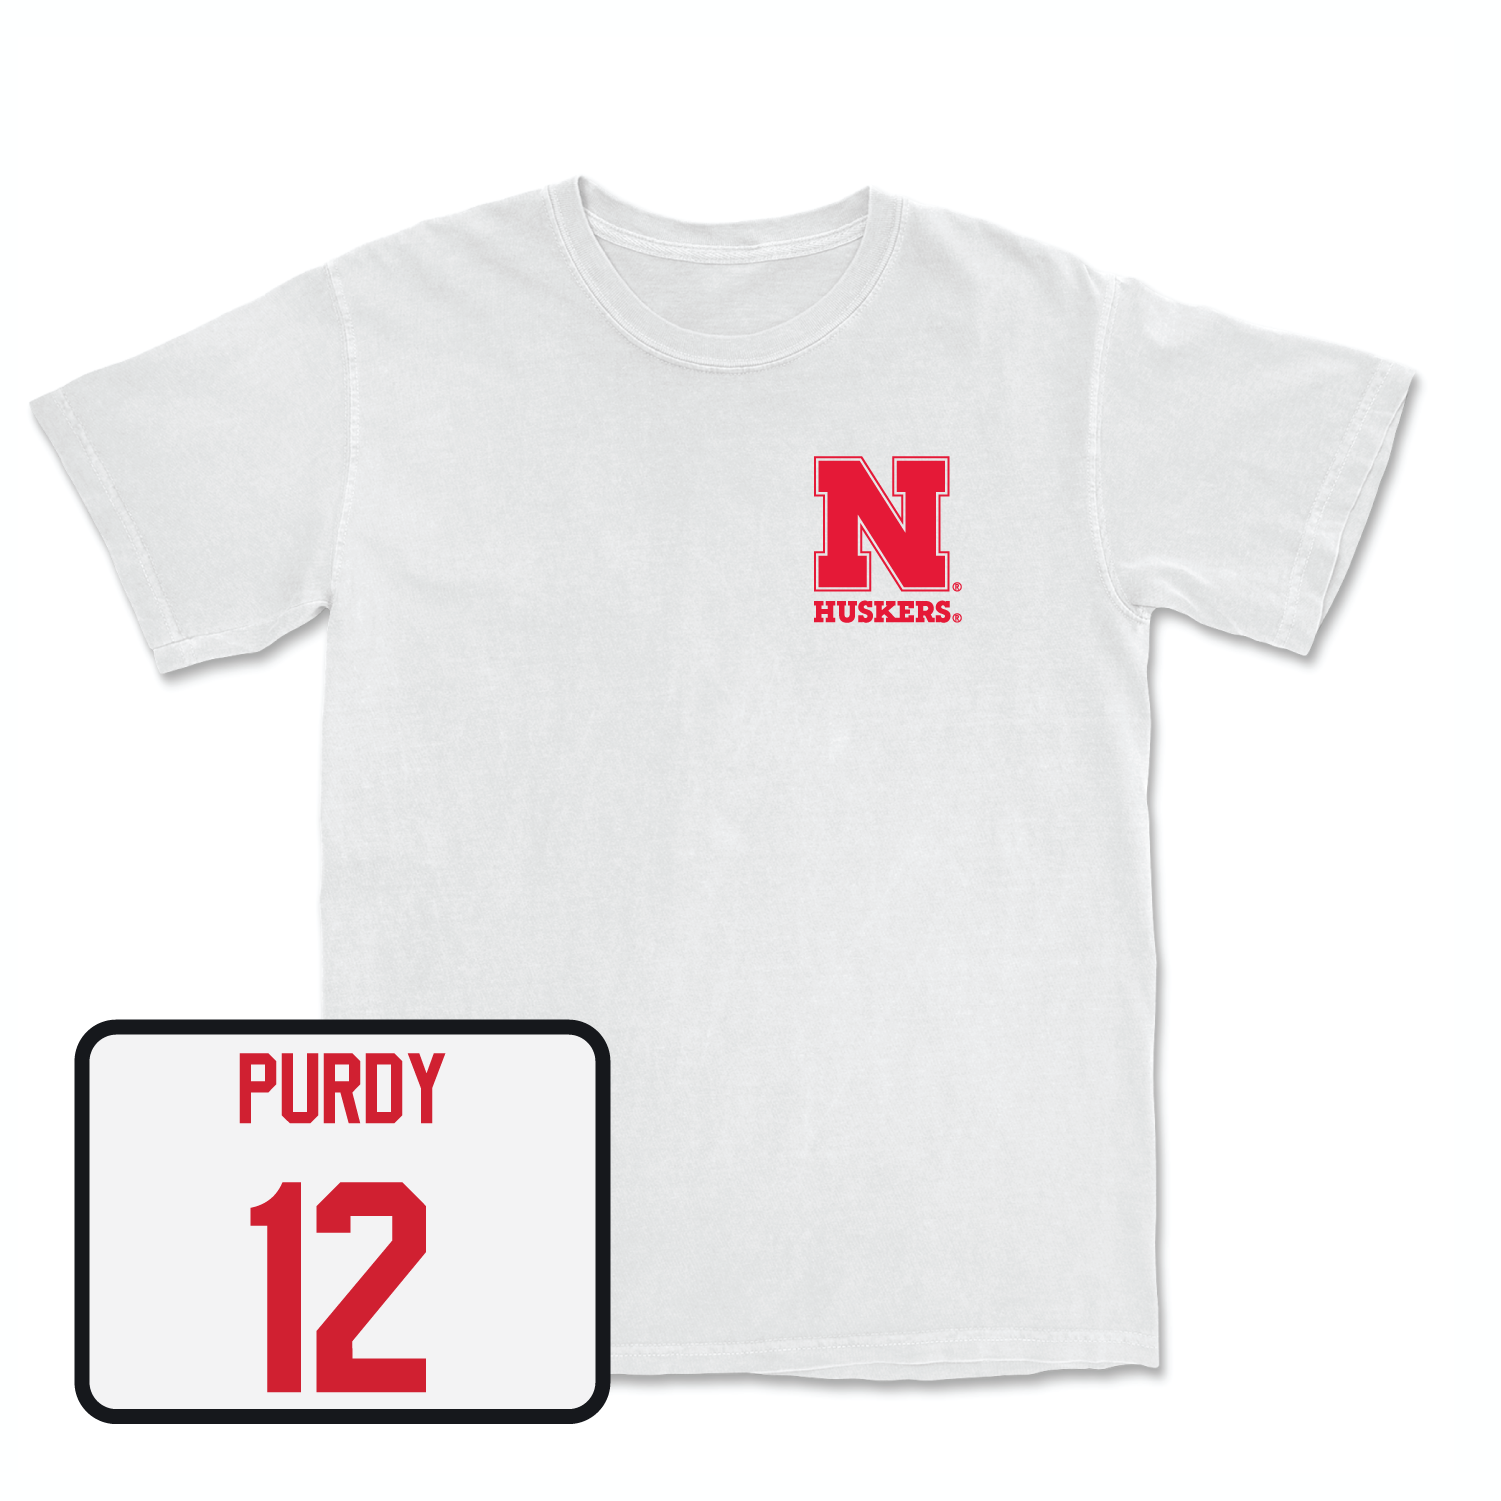 White Football Comfort Colors Tee 2 4X-Large / Chubba Purdy | #12